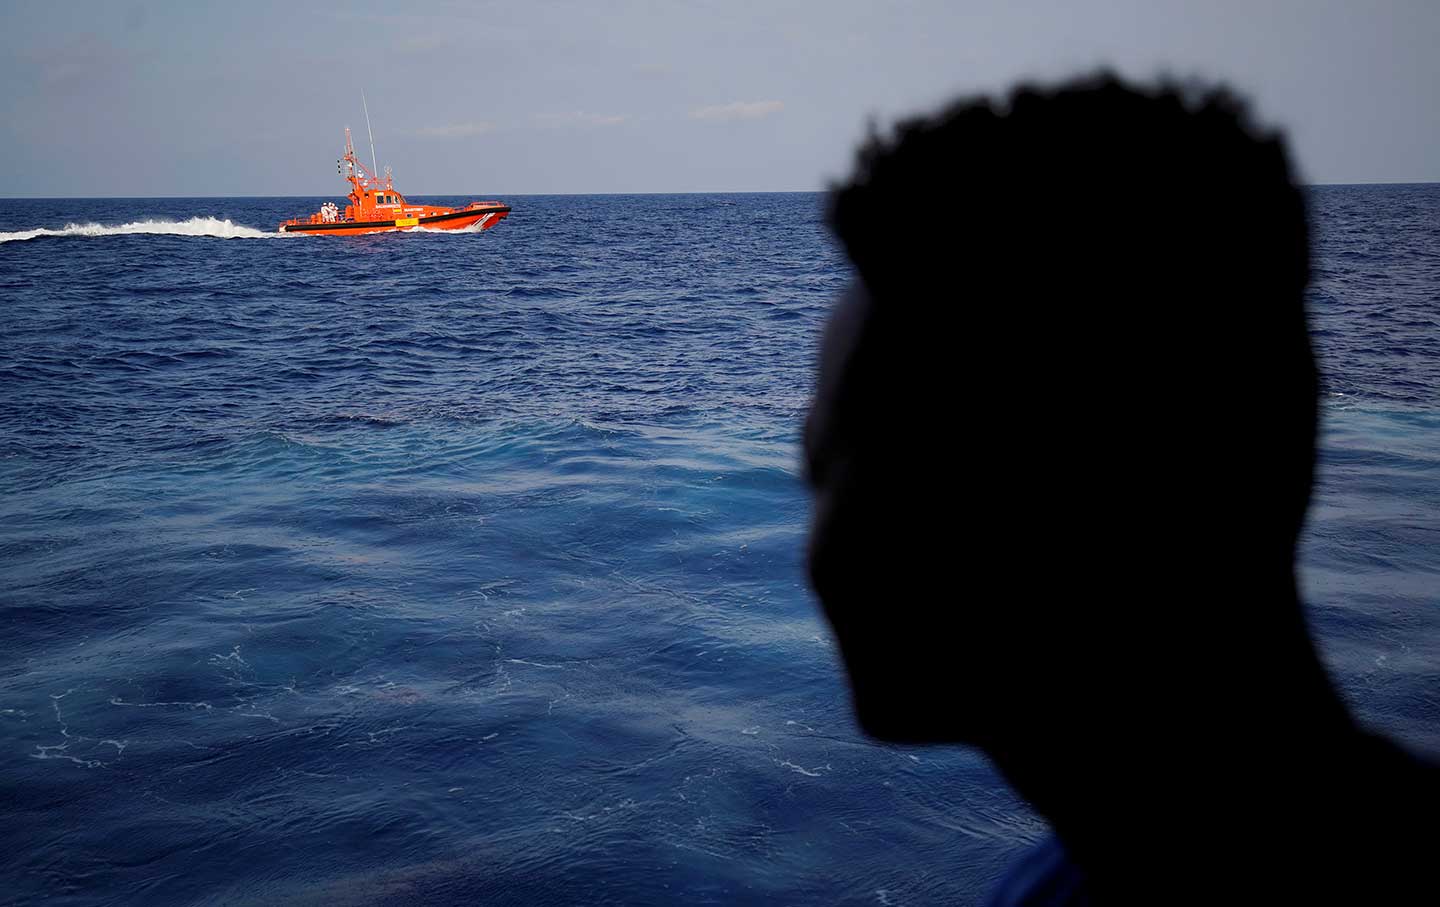 Europe Hardens Its Borders and Deepens the Migrant Crisis at Sea